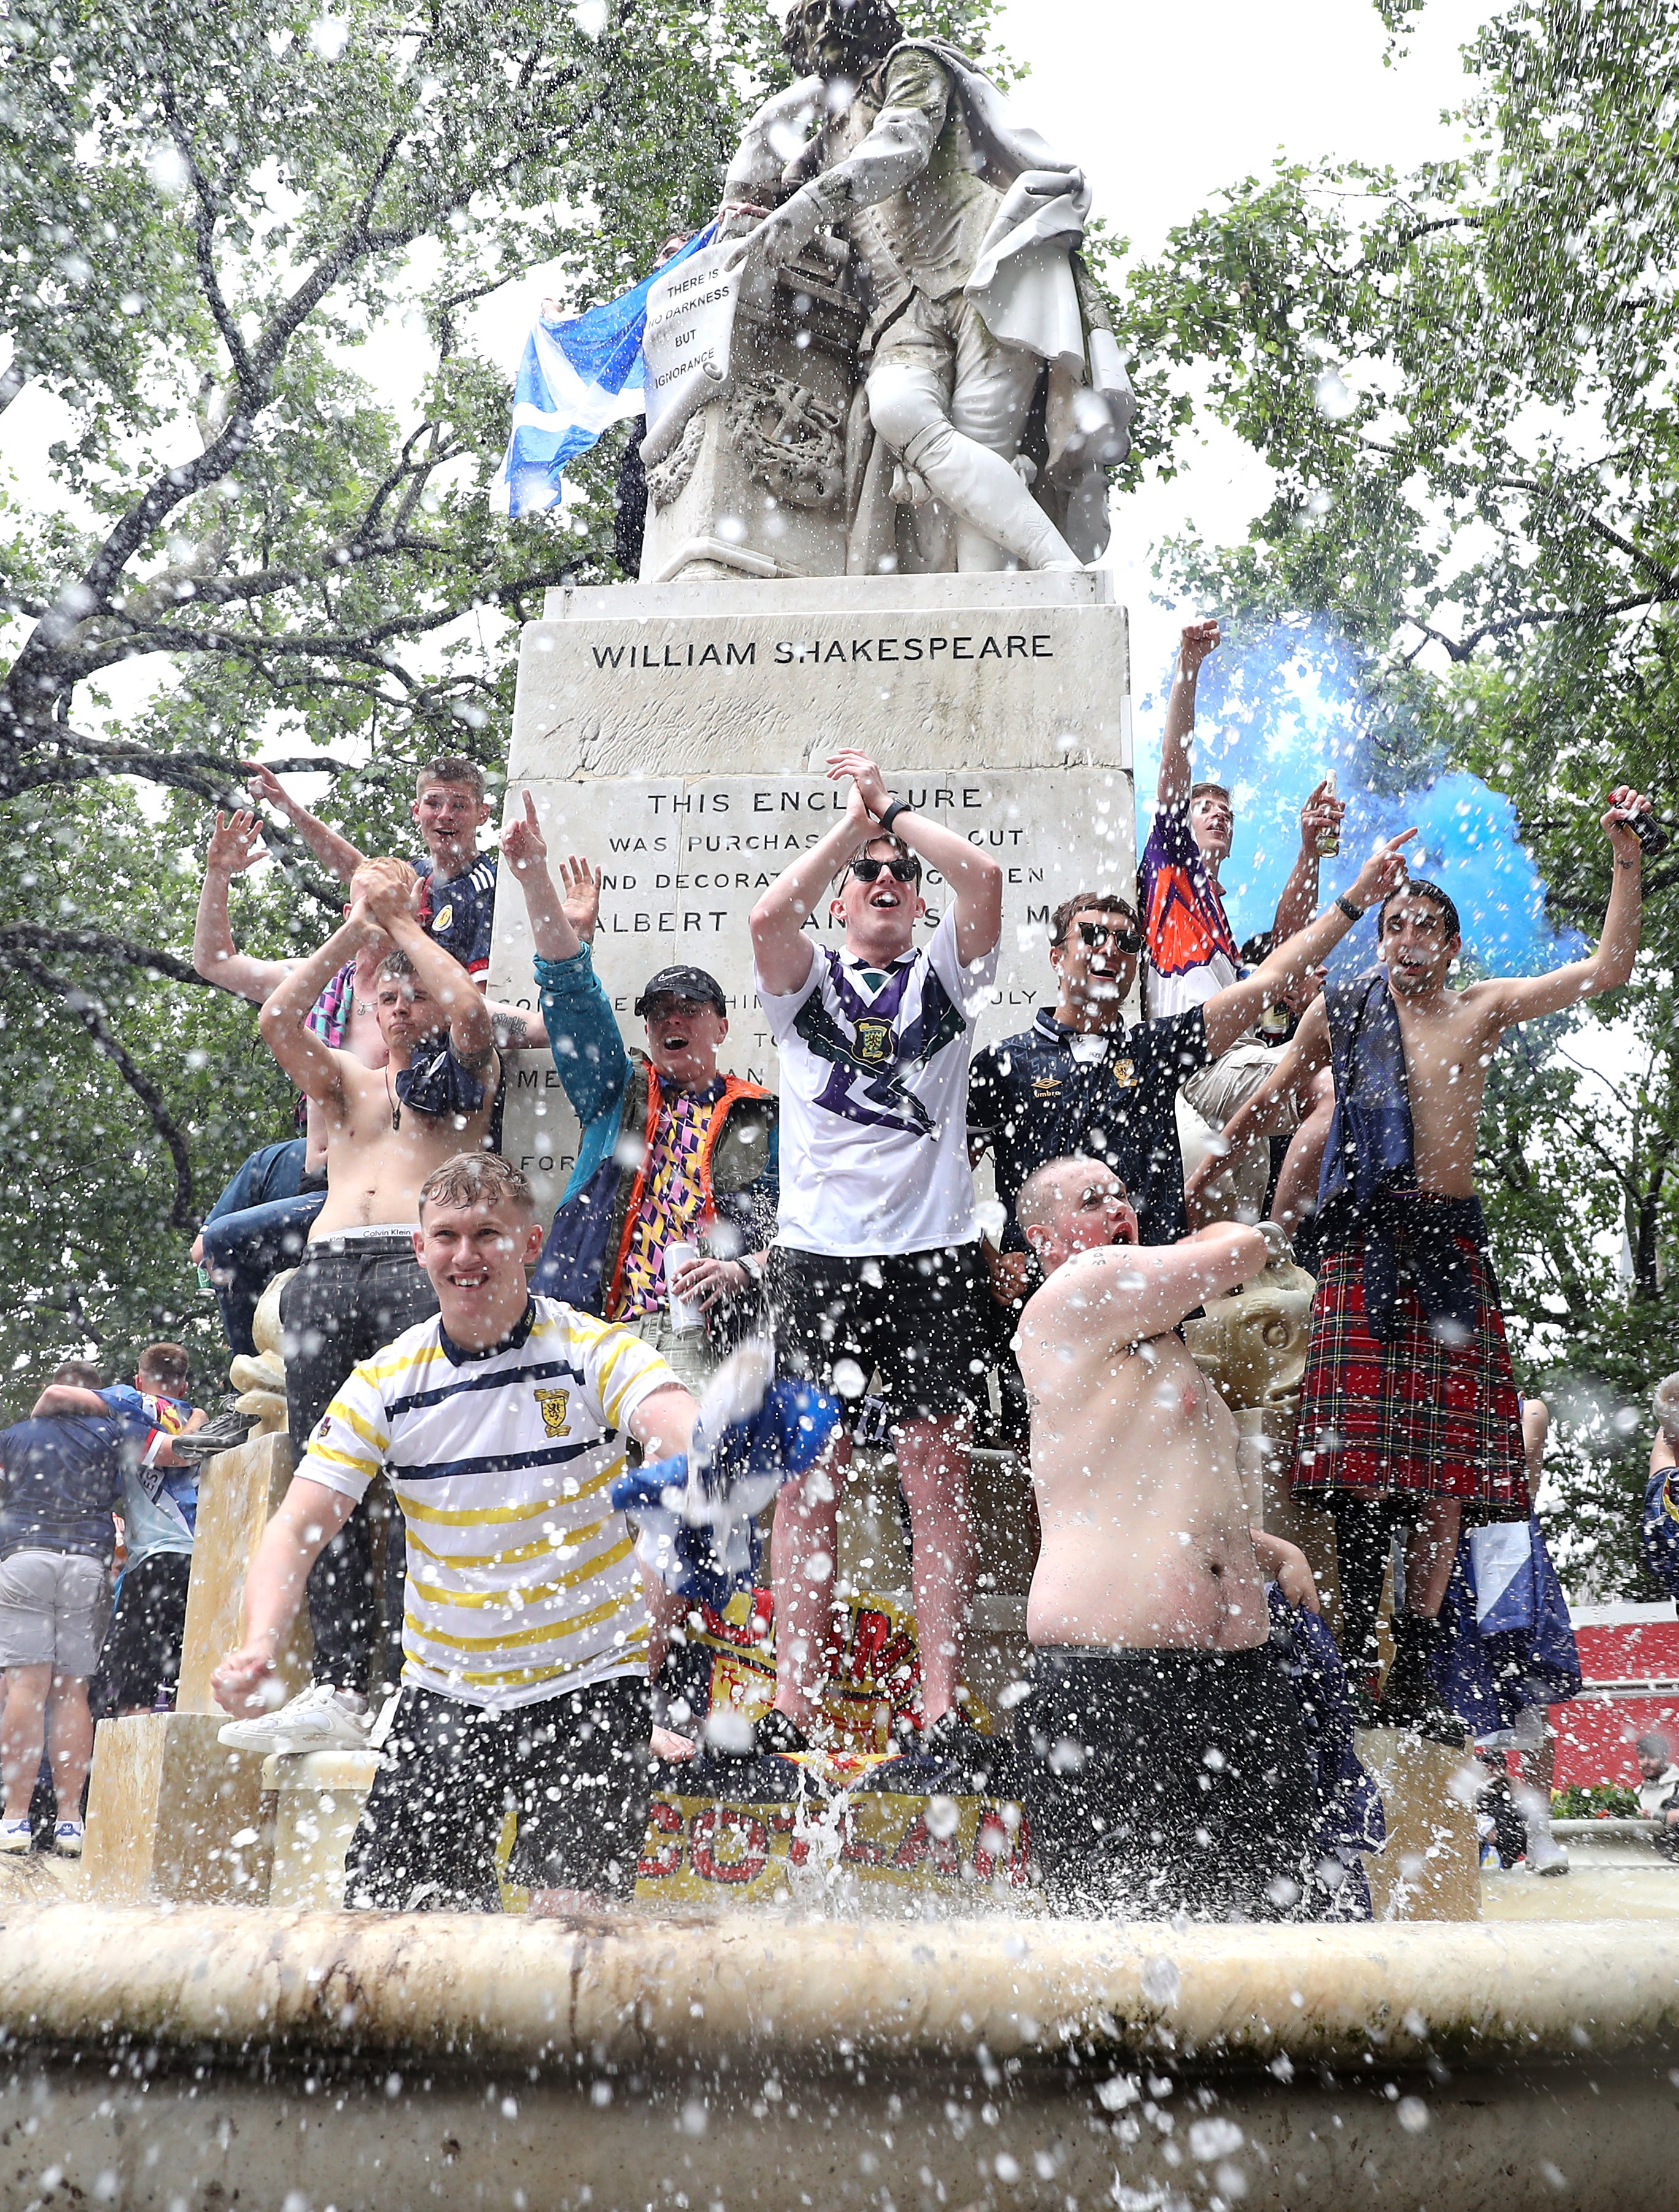 The weather didn’t stop fans leaping into London fountains.